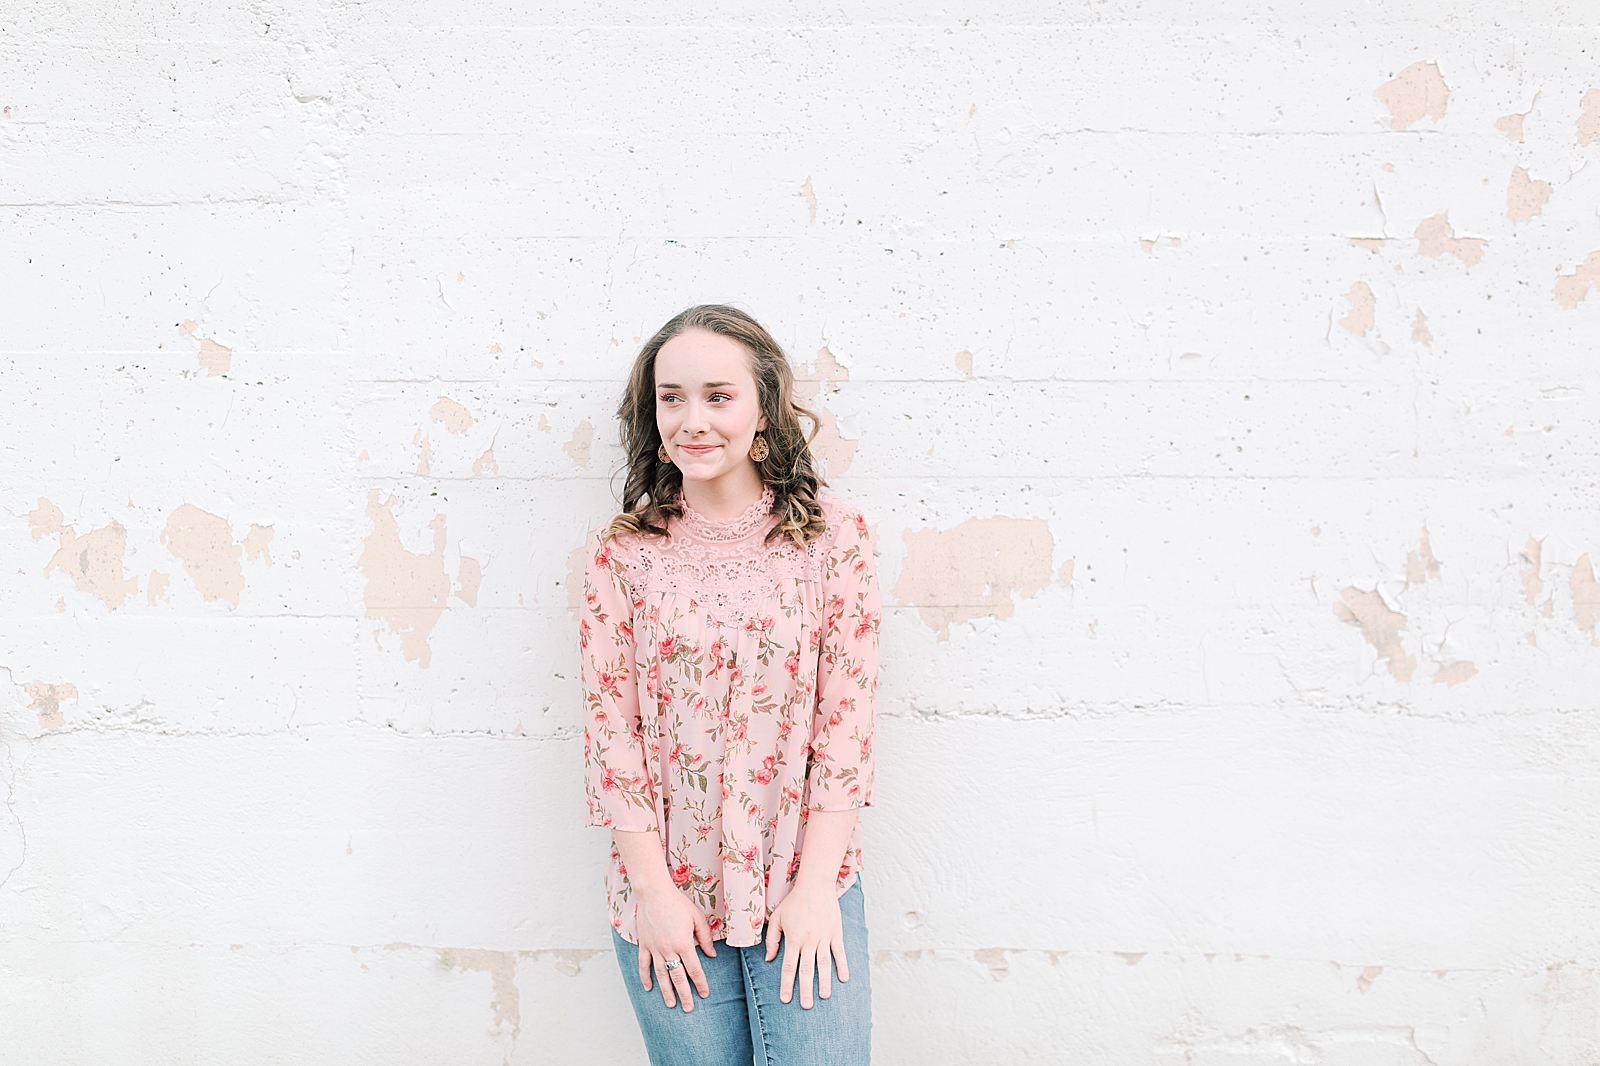 High School Senior Session Zoe leaning against white wall Photo